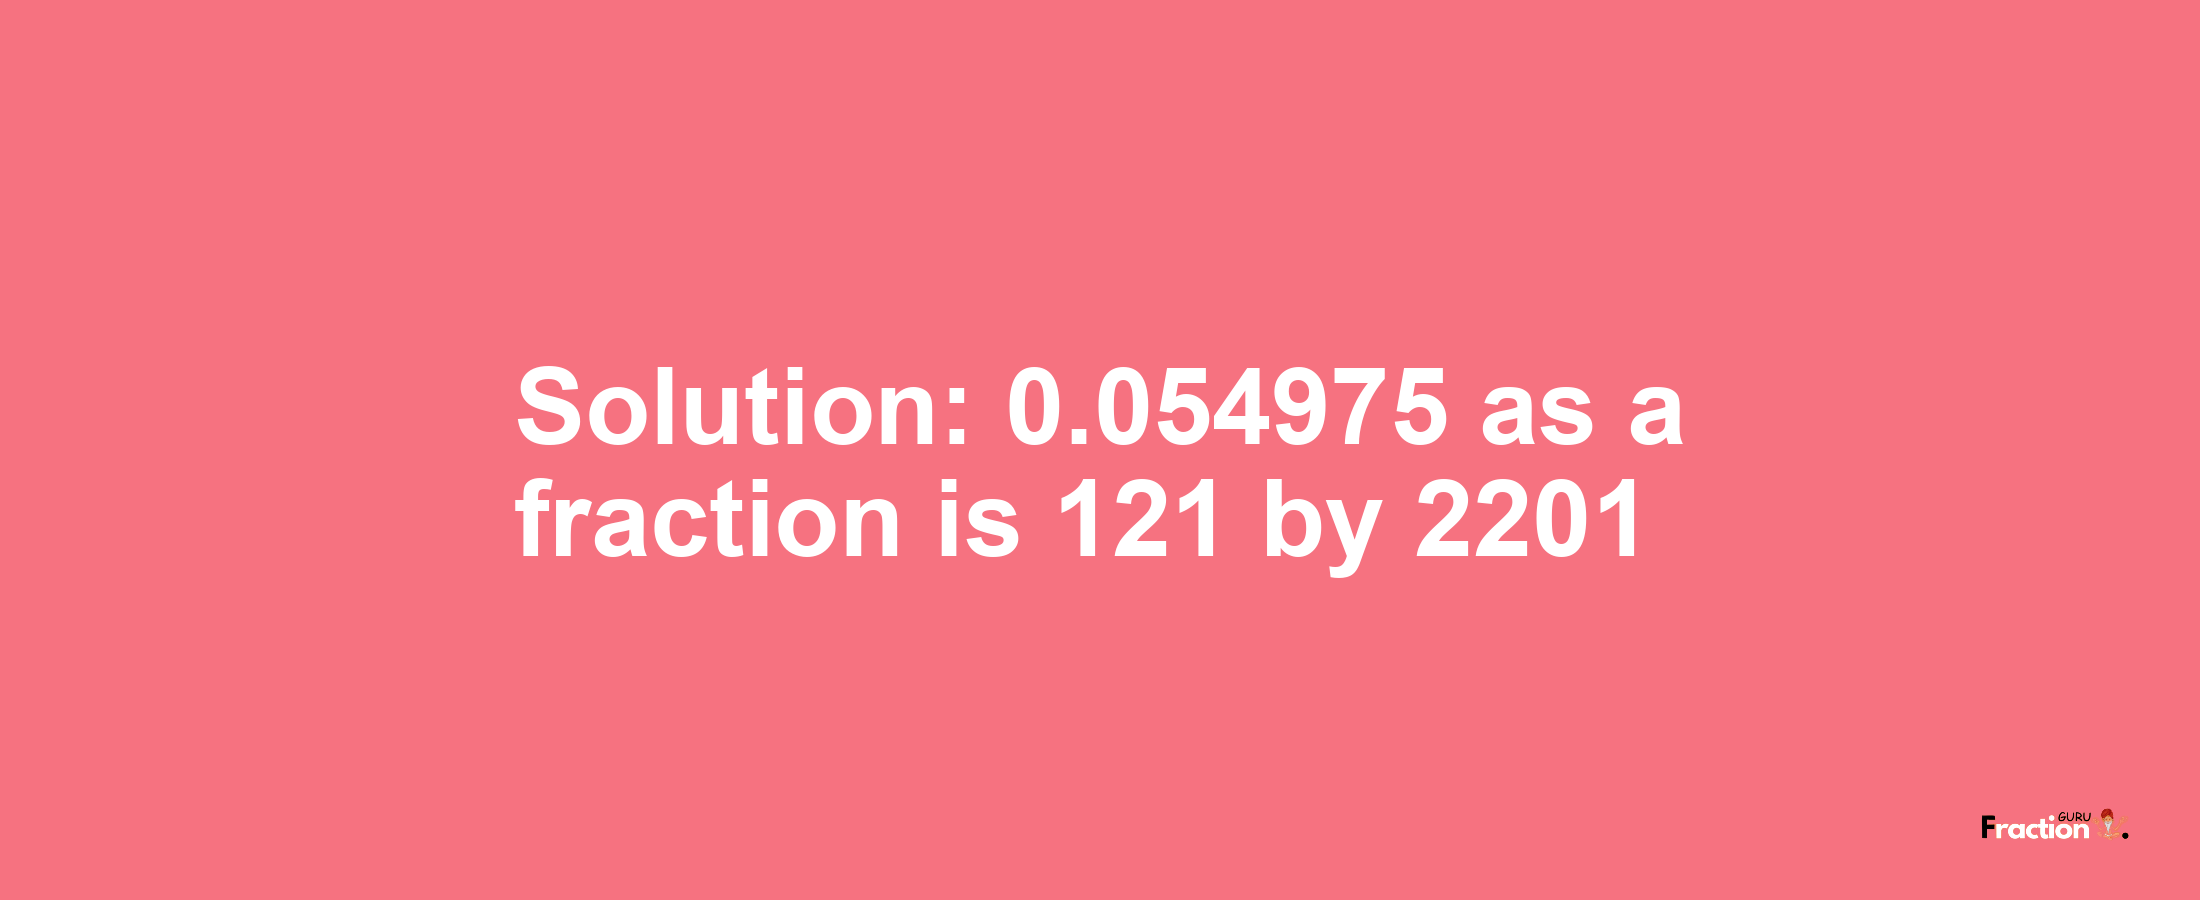 Solution:0.054975 as a fraction is 121/2201